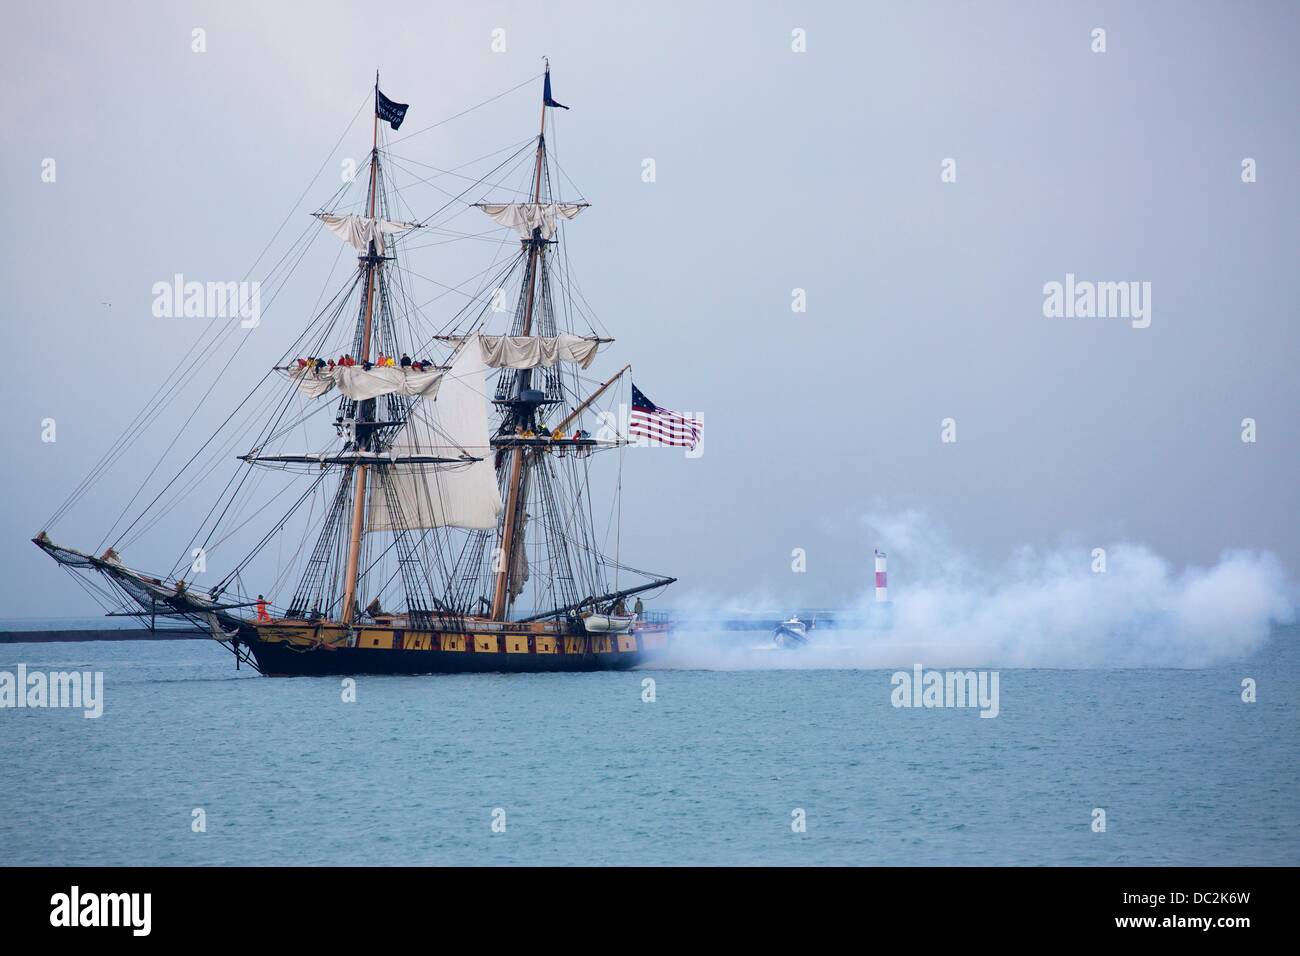 Chicago, Illinois, USA. 7th August 2013. The brig Flagship Niagara, a replica of Commodore Oliver Hazard Perry's victorious flagship at the 1813 Battle of Lake Erie, fires a canon during the parade of ships at Tall Ships 2013 in Chicago. The festival of ships runs from today until August 11 at Navy Pier. A selection of ships are available for dockside boarding and a few are available for cruises. Credit:  Todd Bannor/Alamy Live News Stock Photo